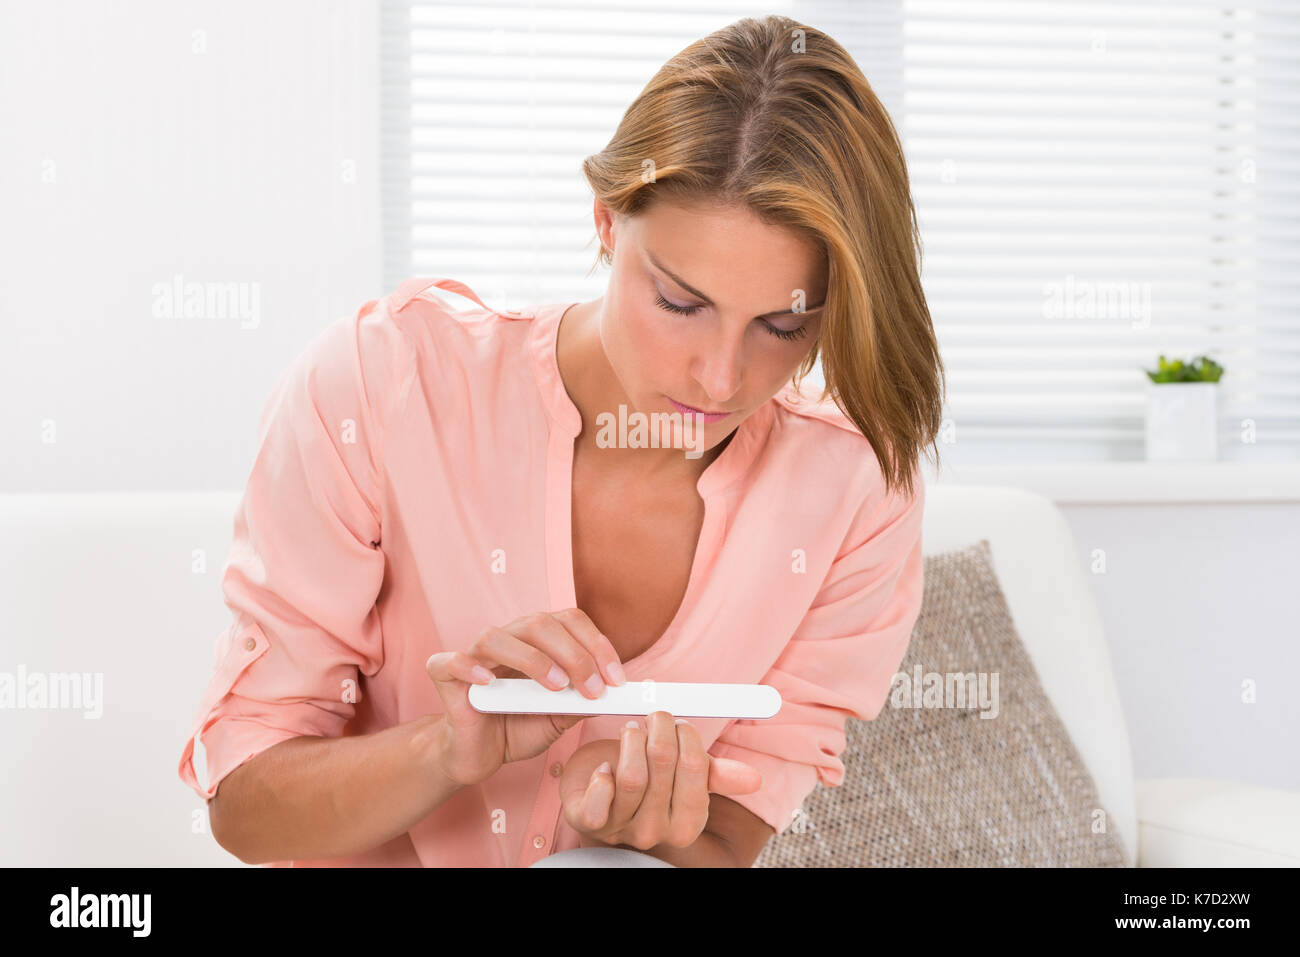 Portrait Of Young Woman Filing Nails With Nail File At Home Stock Photo